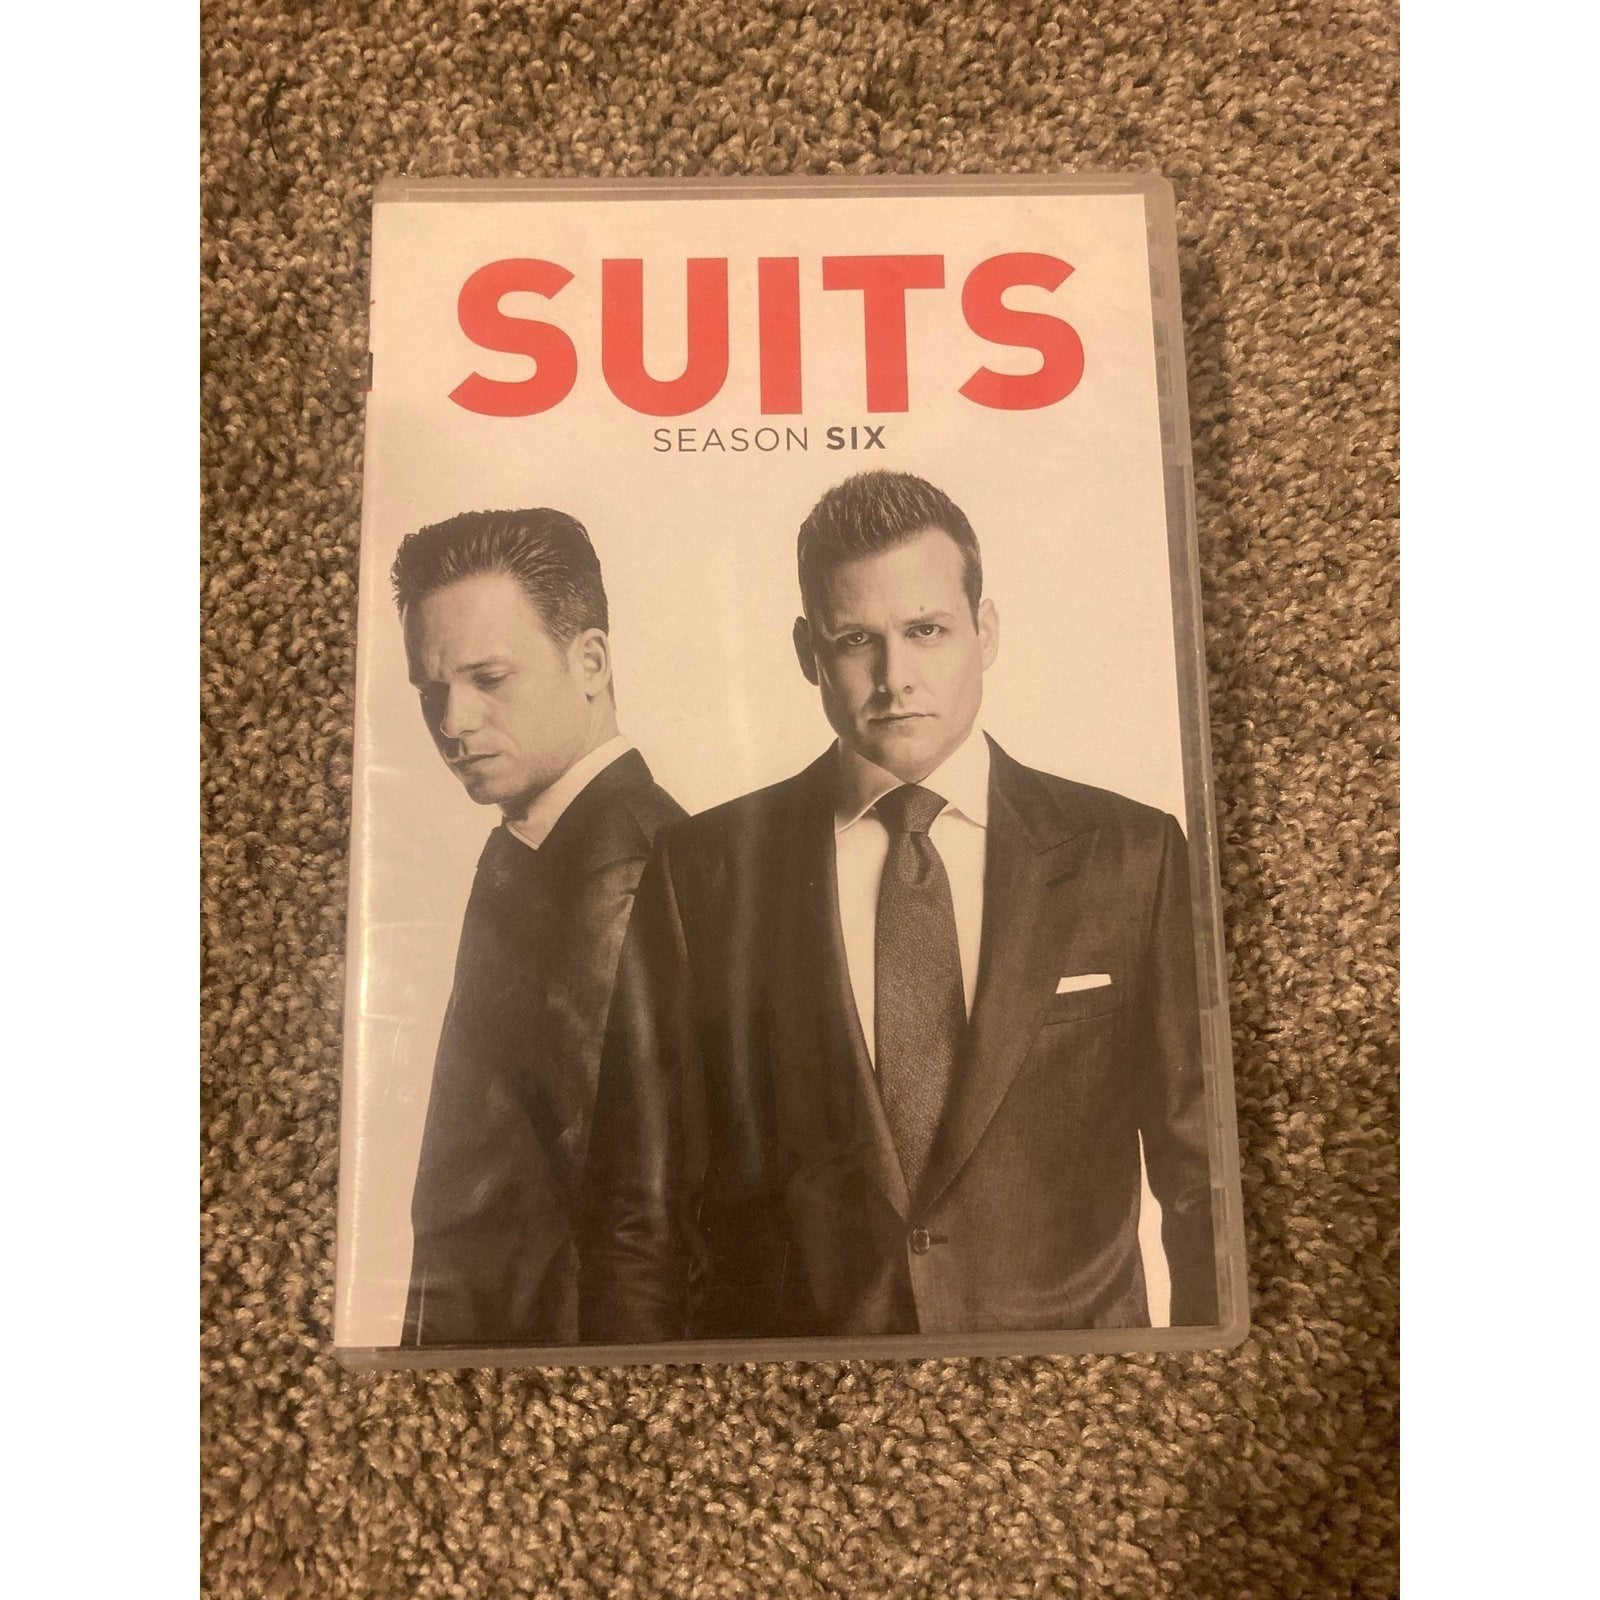 Suits: season 7 is released in DVD boxed sets! - just focus